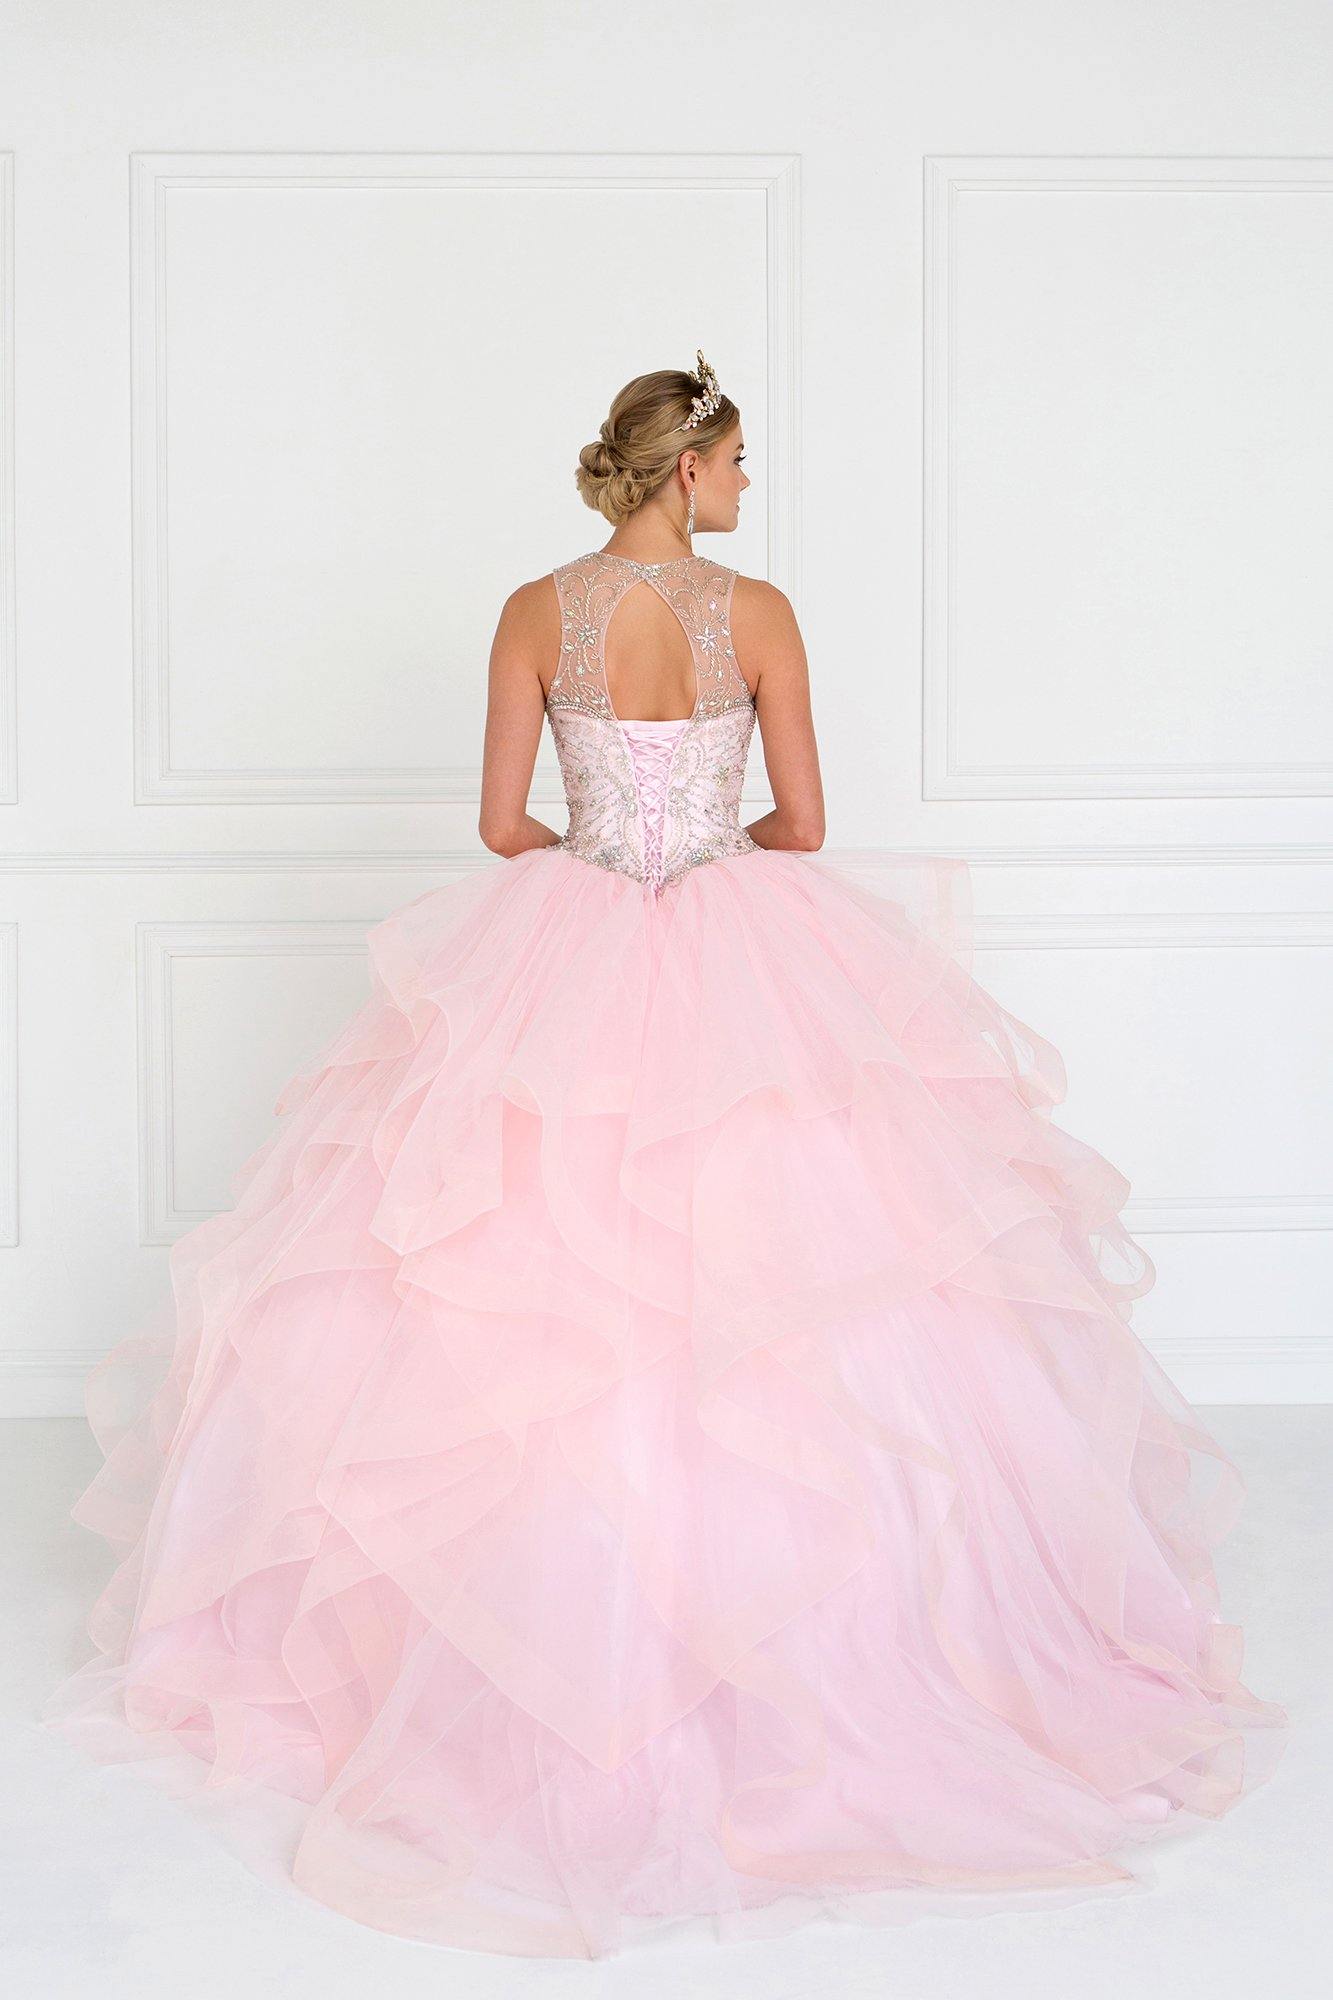 Quinceanera Cut-Out Back Ball Gown Dress with Bolero - The Dress Outlet Elizabeth K